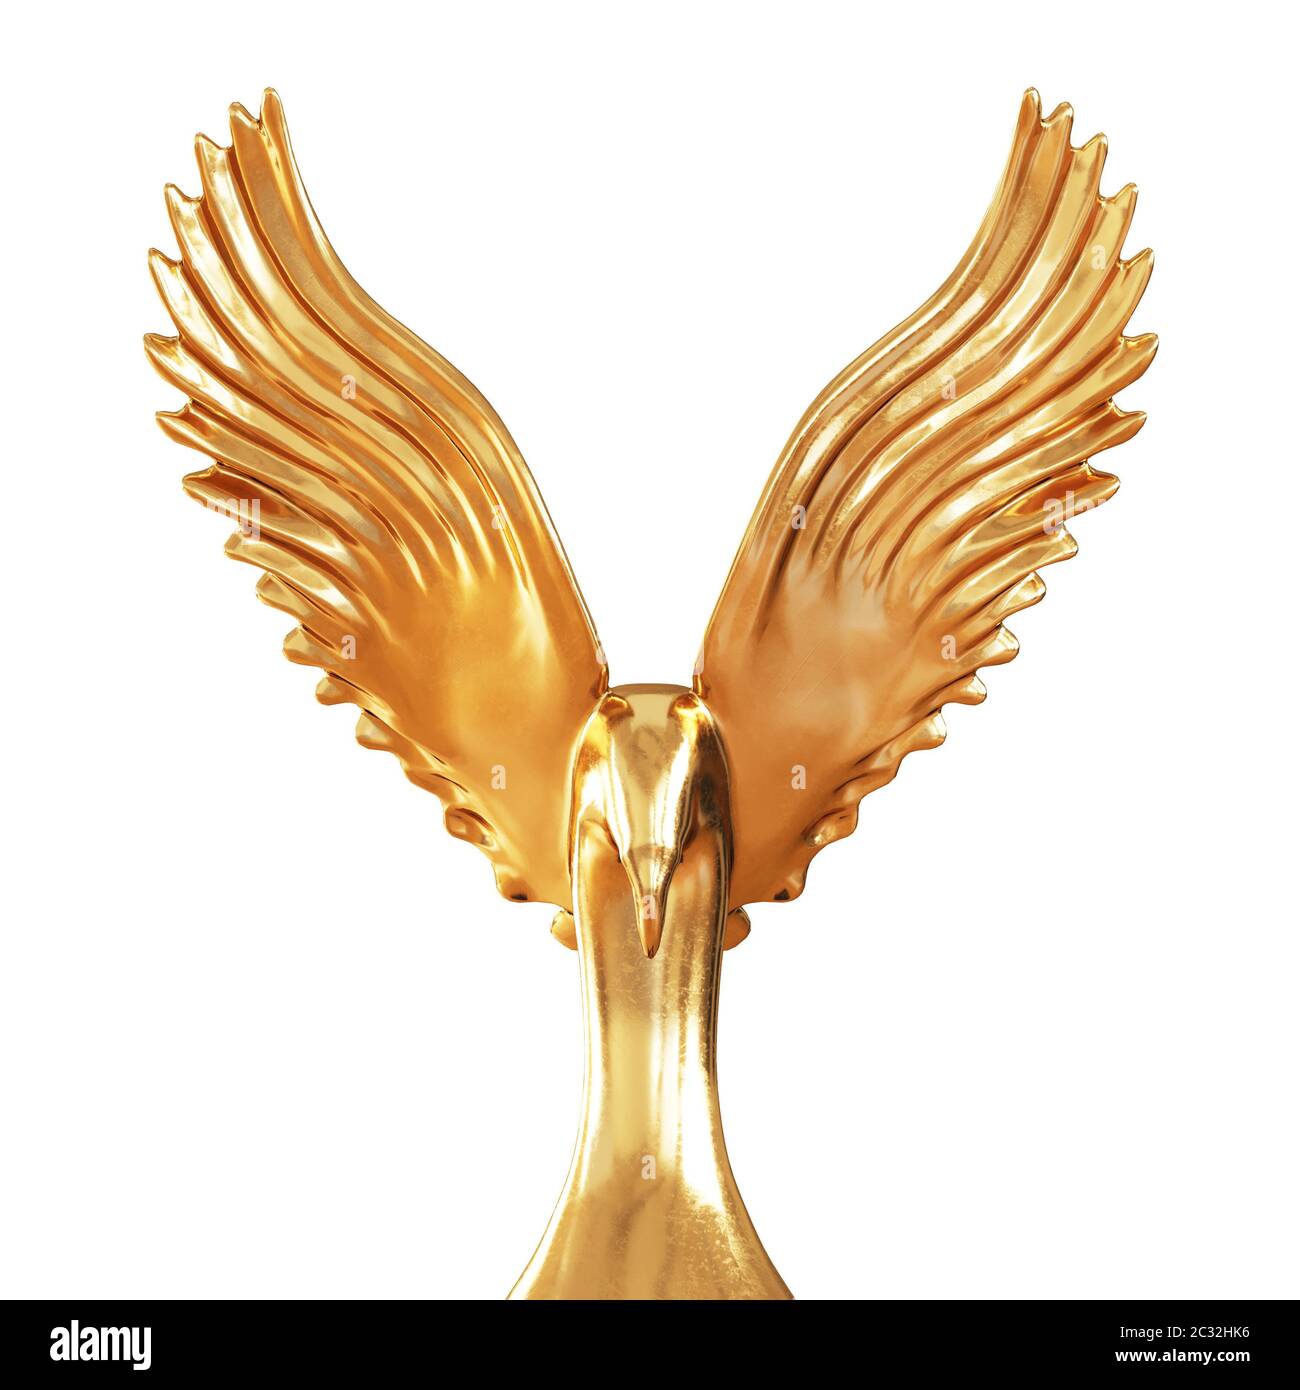 Golden eagle figurine with spread wings on a white background. Mocap. 3d rendering Stock Photo